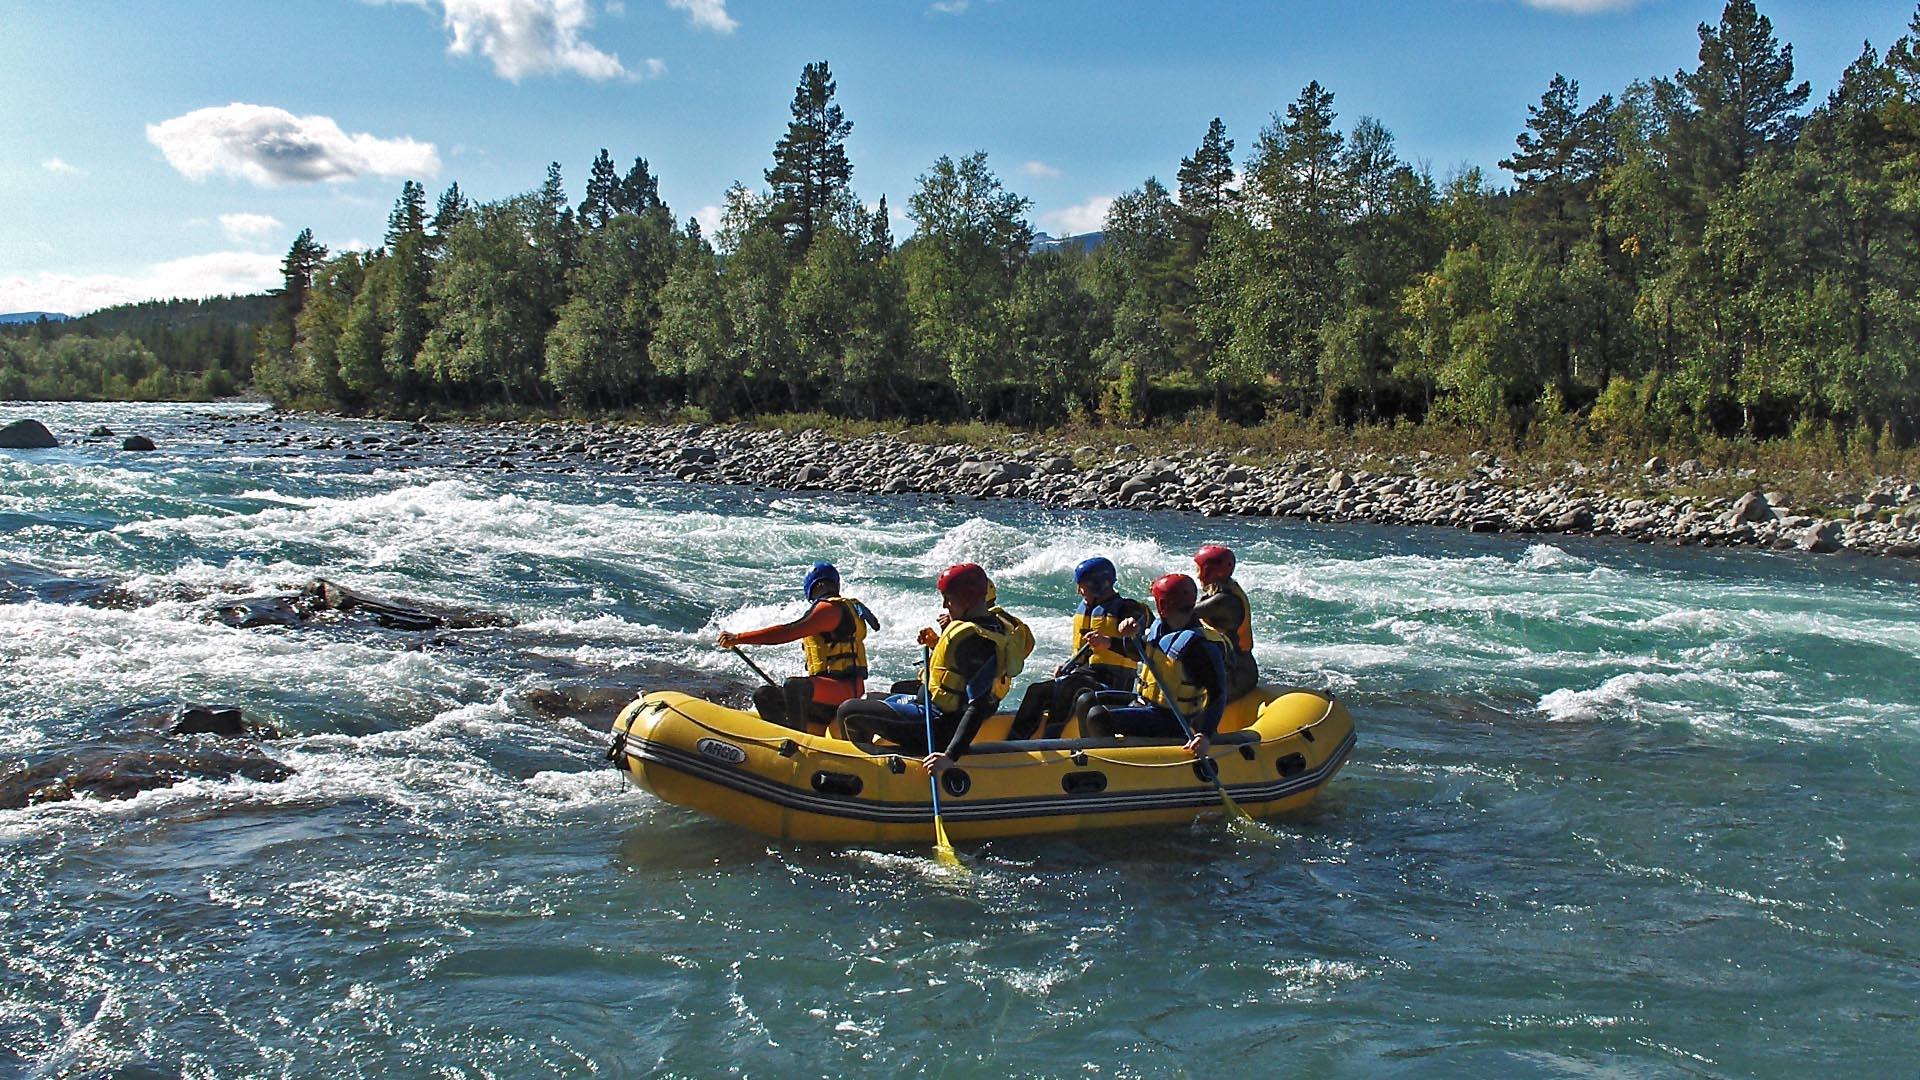 A yellow raft with 5 perons on a blue mountain river with rapids and some birches on the opposite bank.